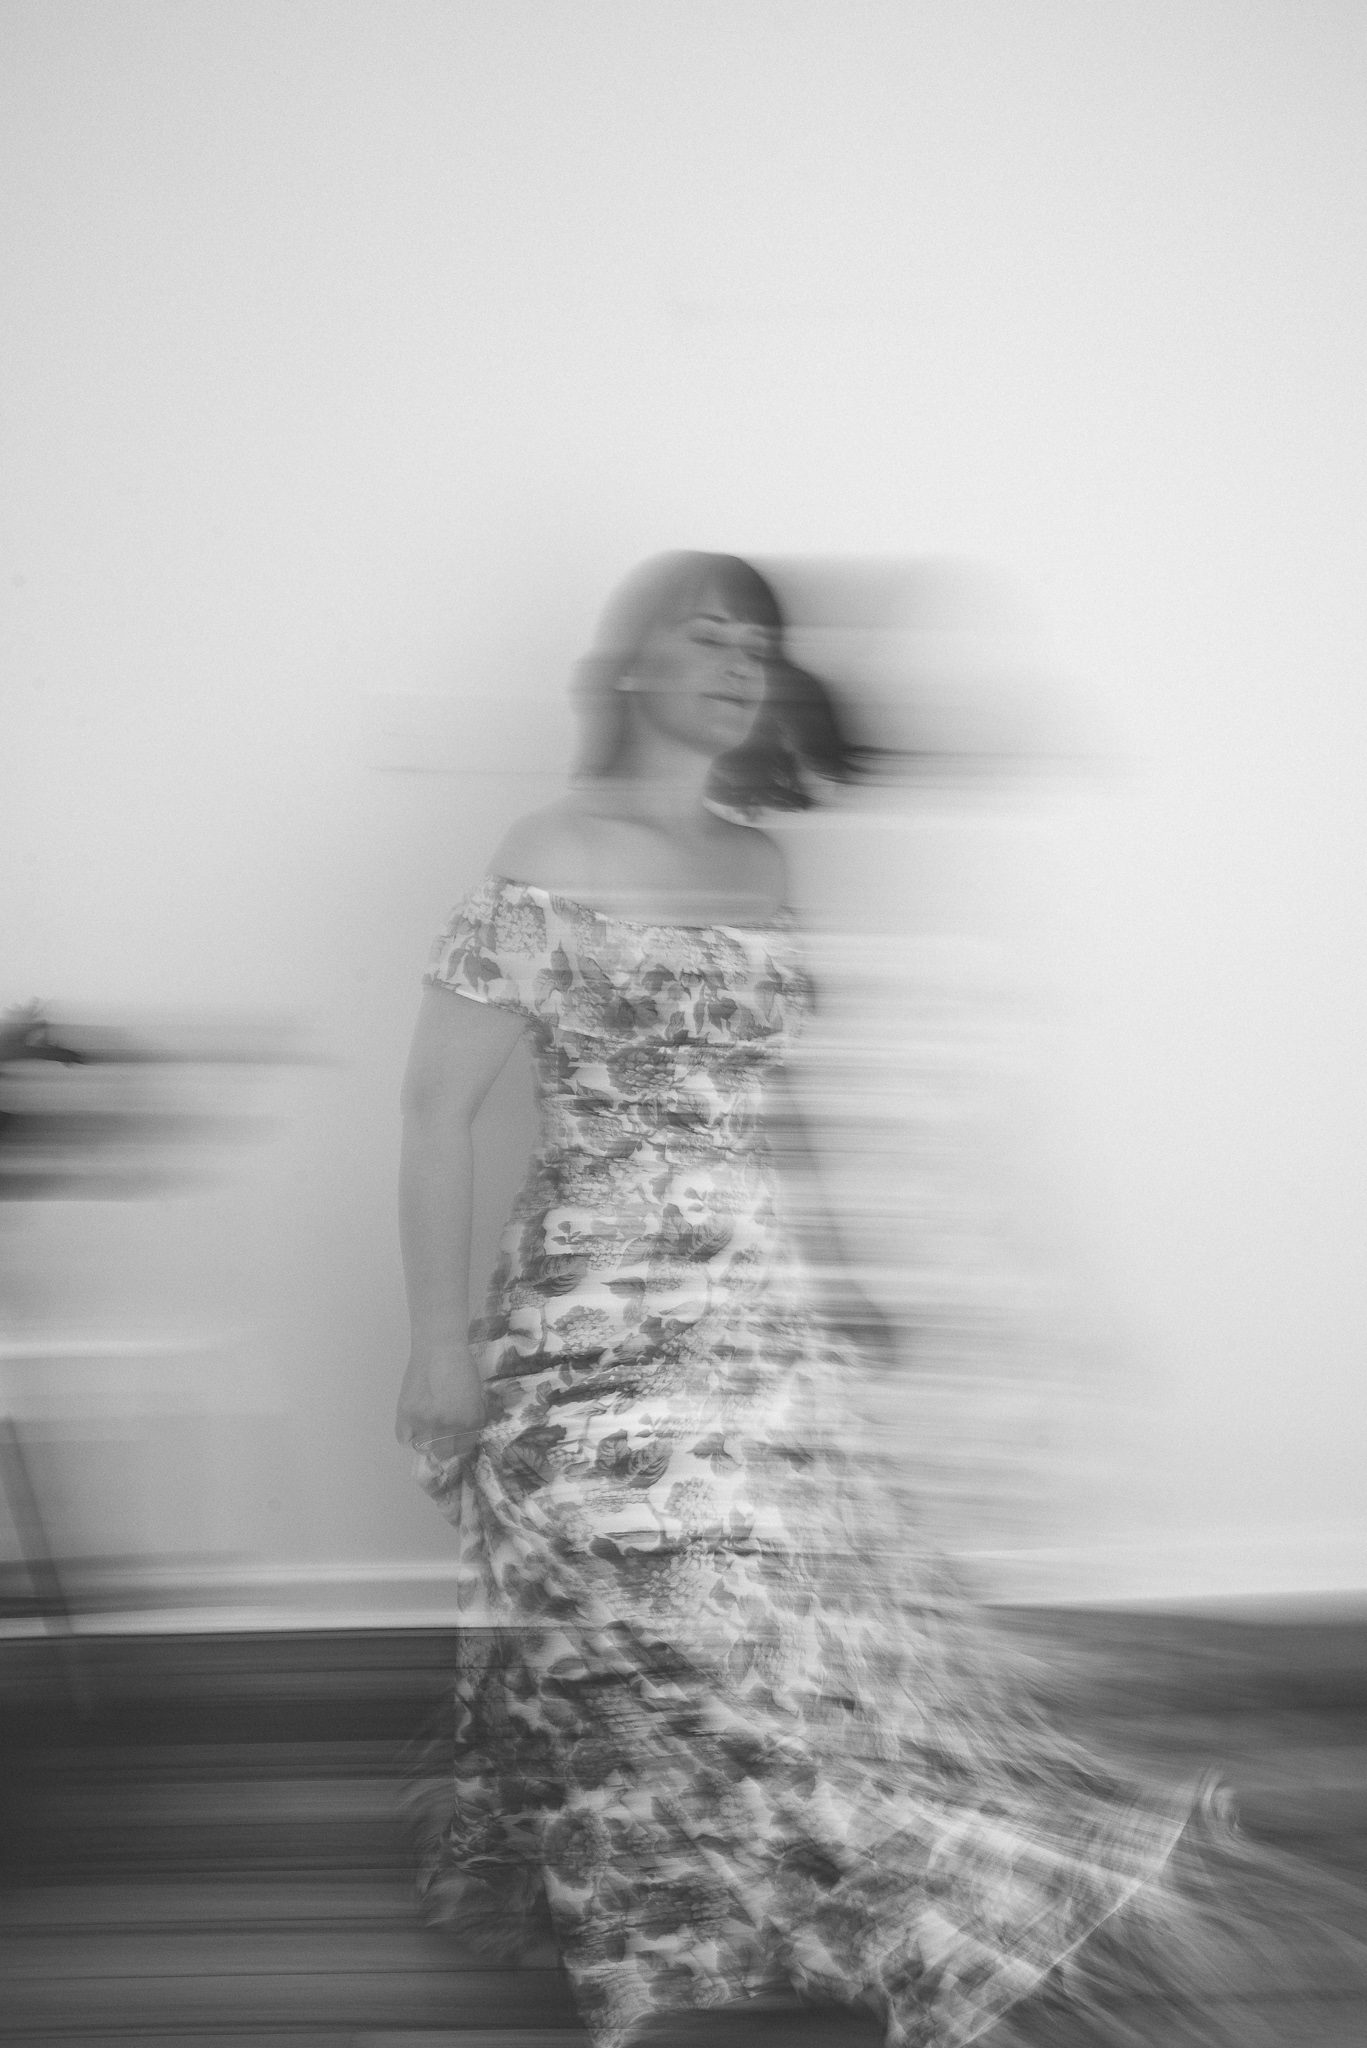 A black and white motion blur image of a lady in a full length floral dress- she appears to be moving backwards.